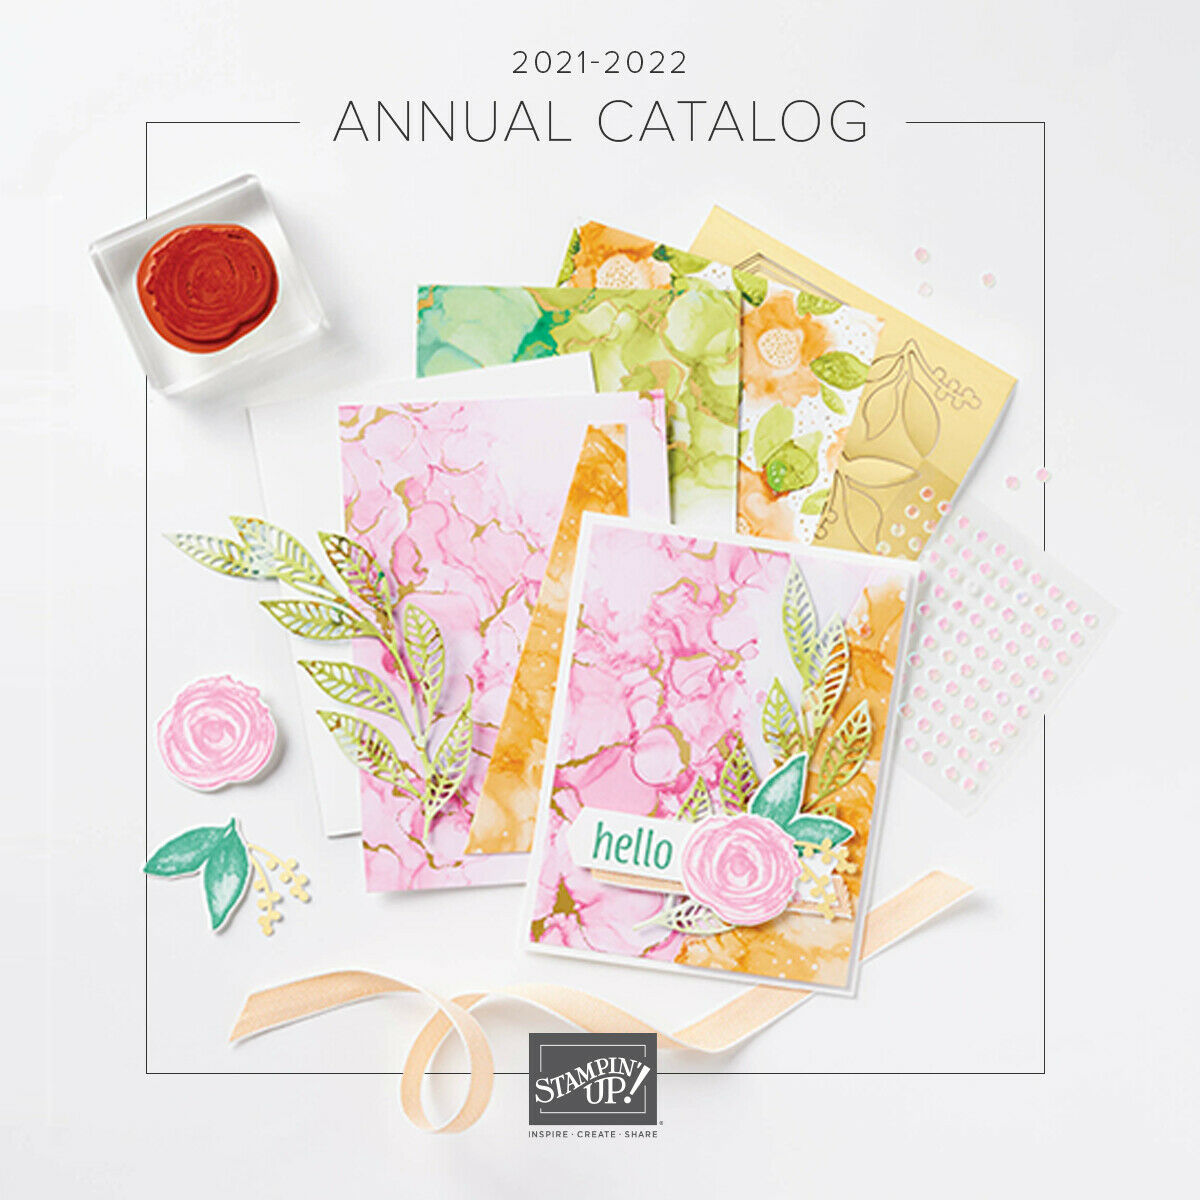 Stampin' Up! 2021-2022 Annual Catalog - Brand New